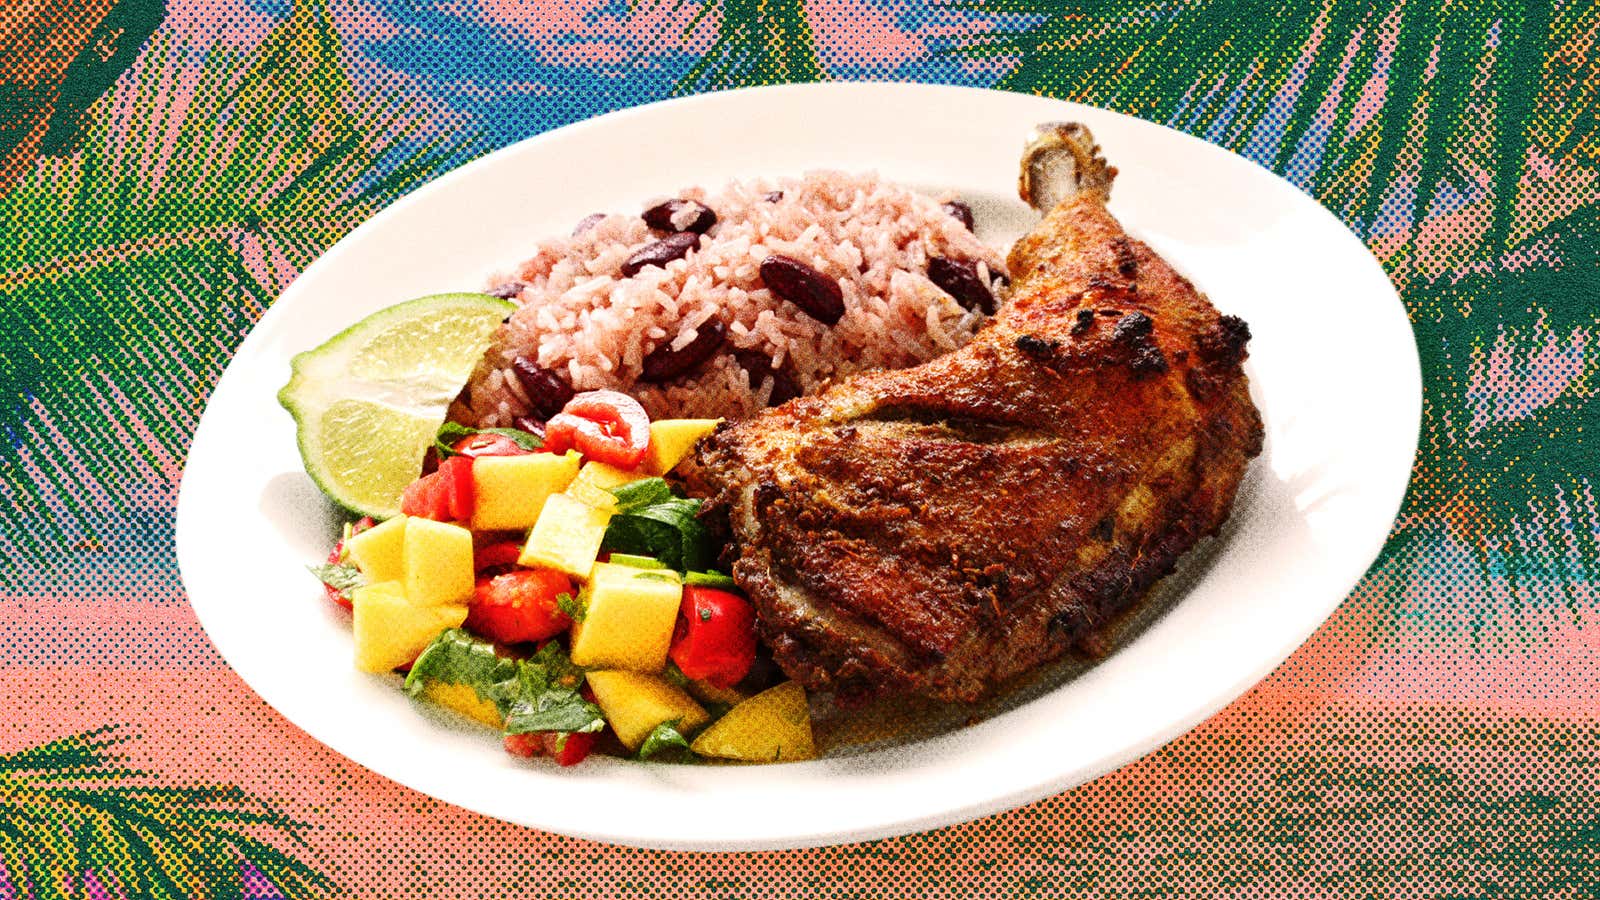 Jamaican jerk is a flavor, a method, and a national identity